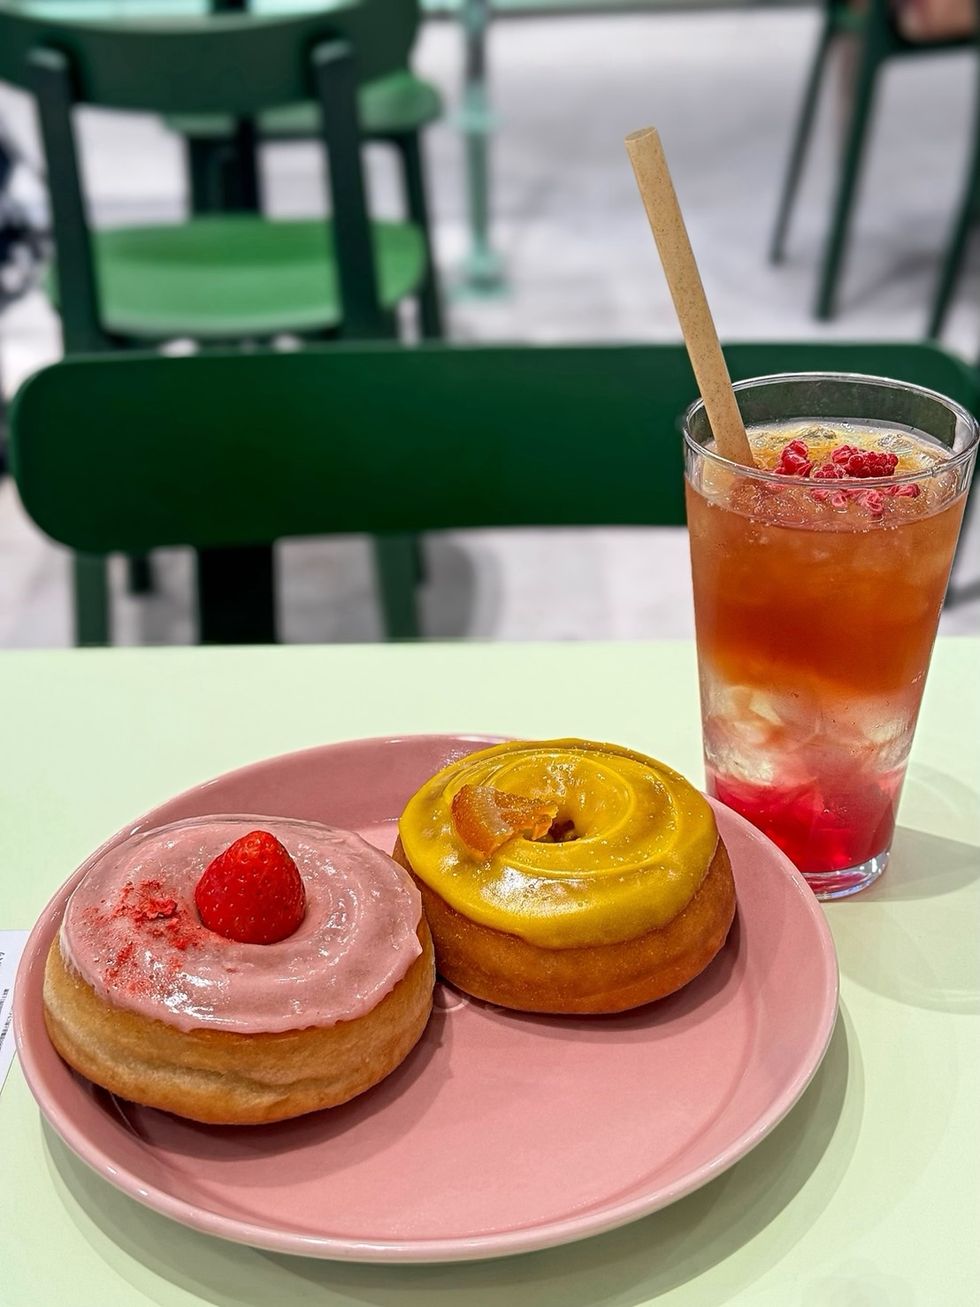 a plate of donuts and a drink on a table